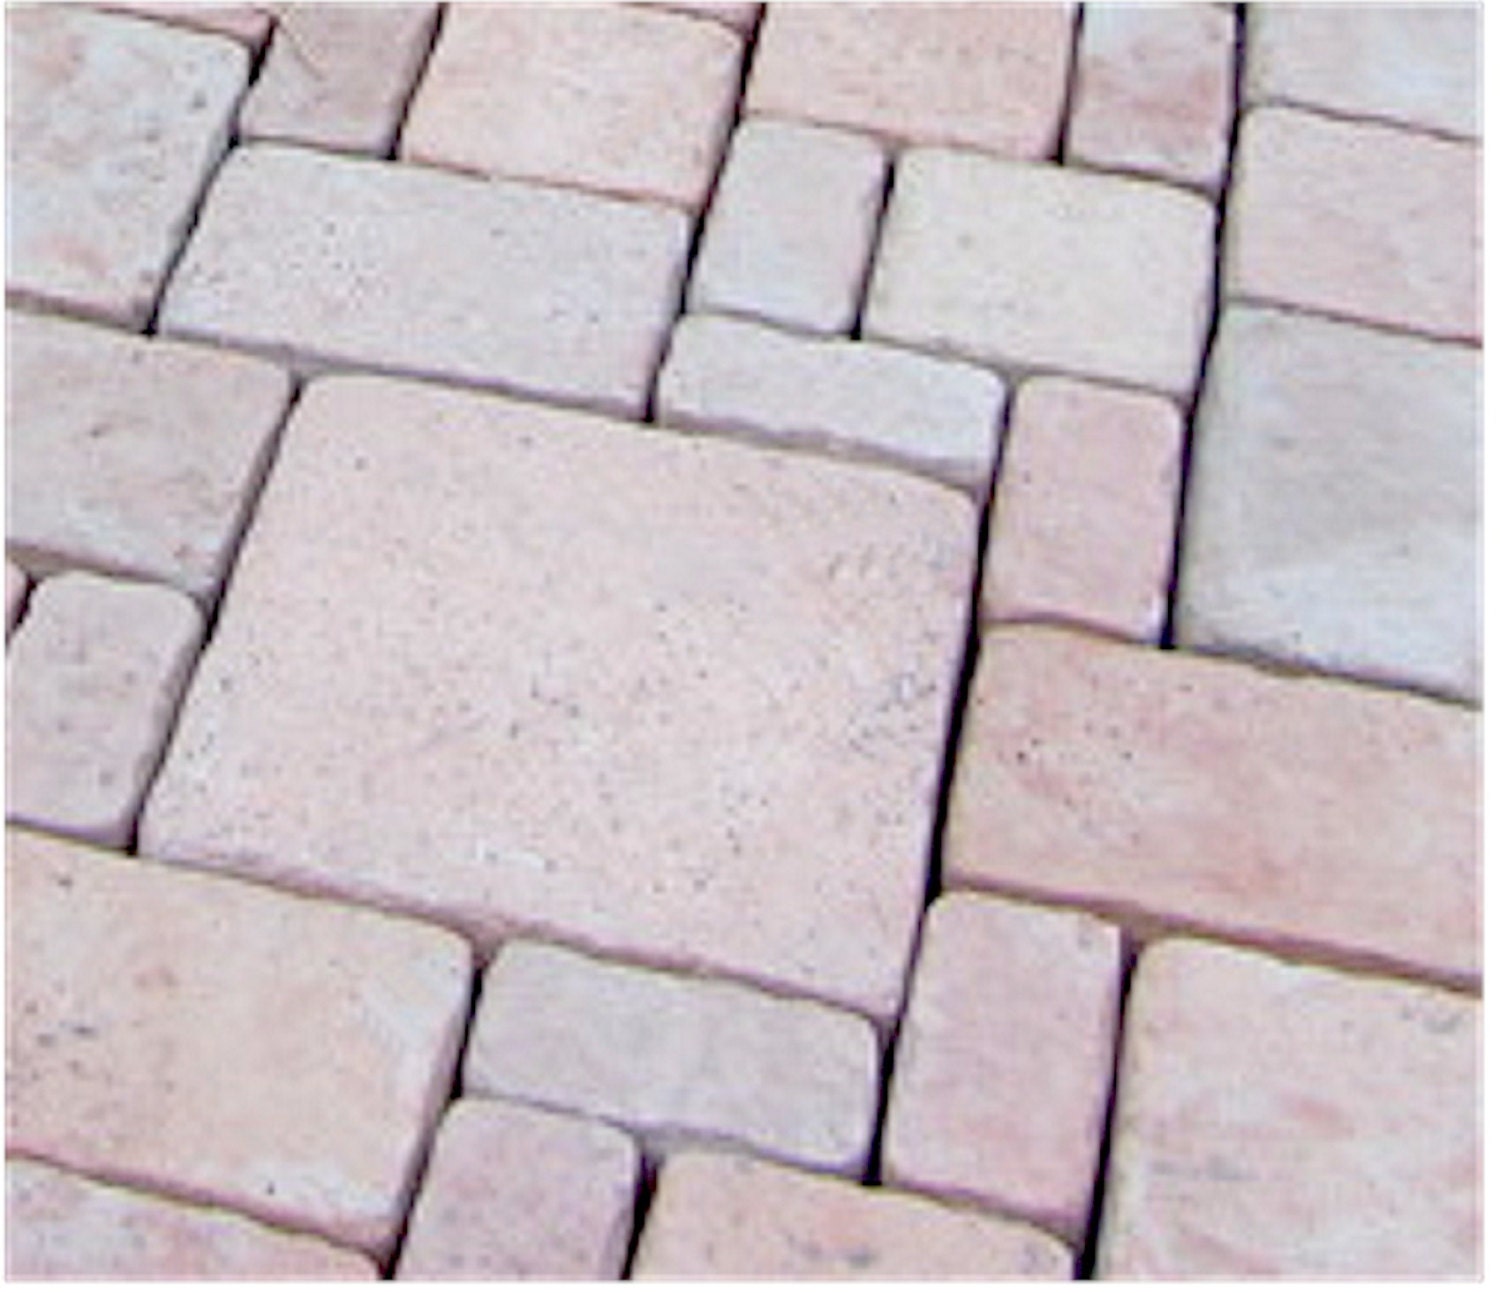 5 Piece Driveway Patio Paver Concrete Molds by stonehook on Etsy